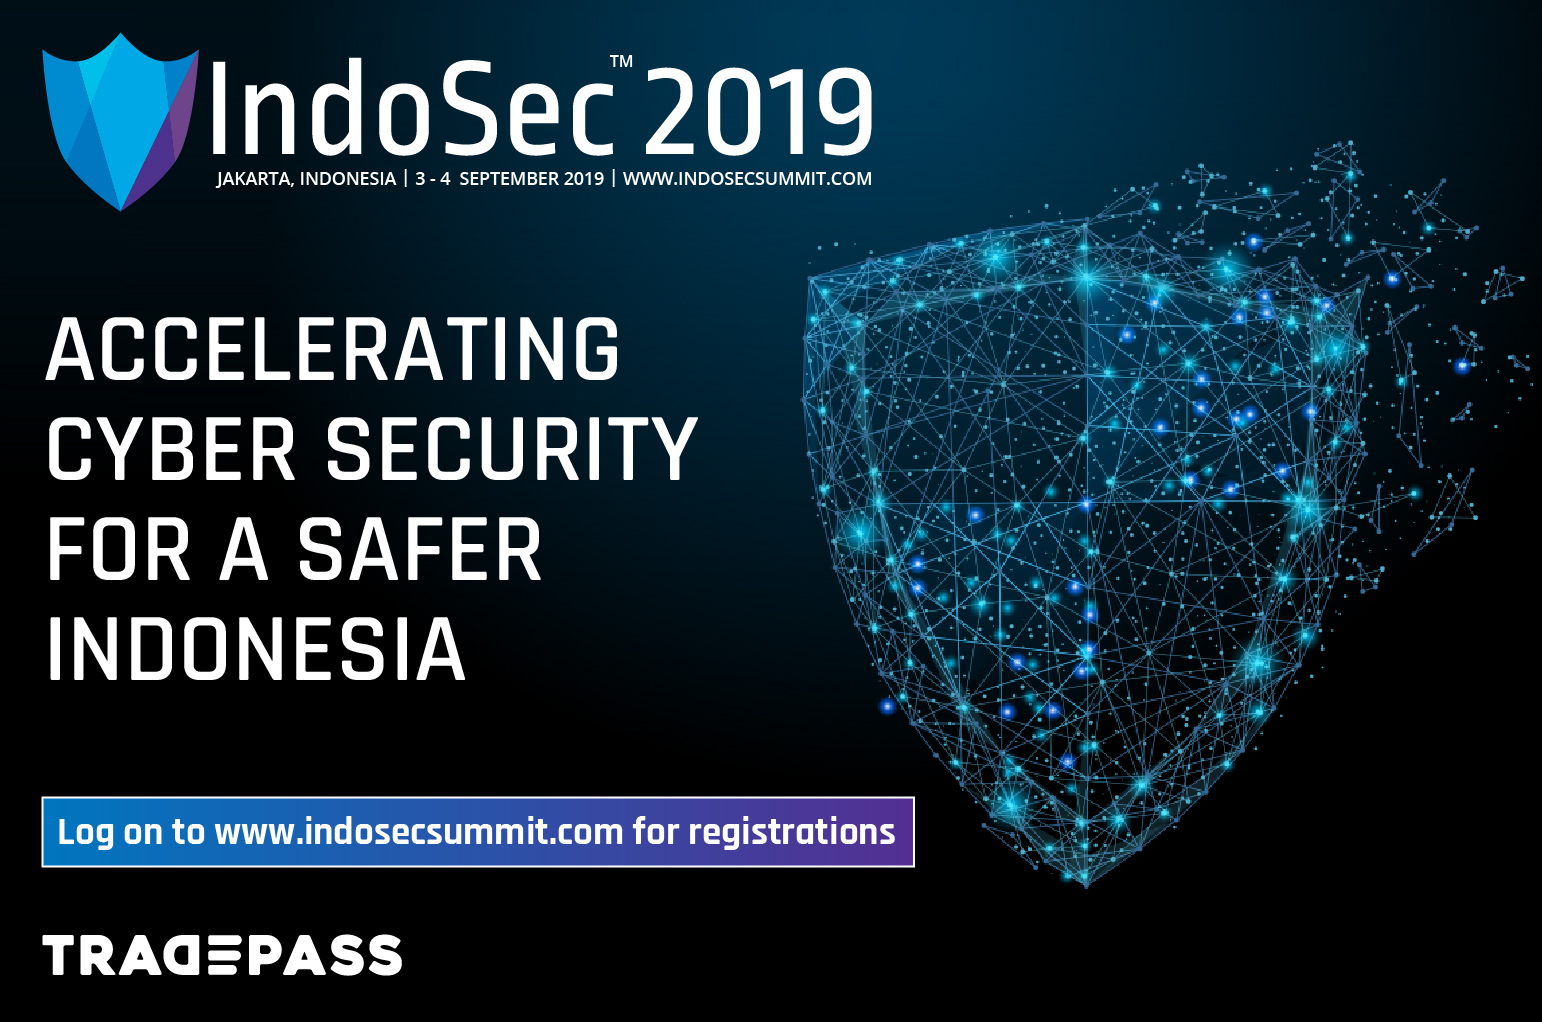 IndoSec 2019 organized by Tradepass